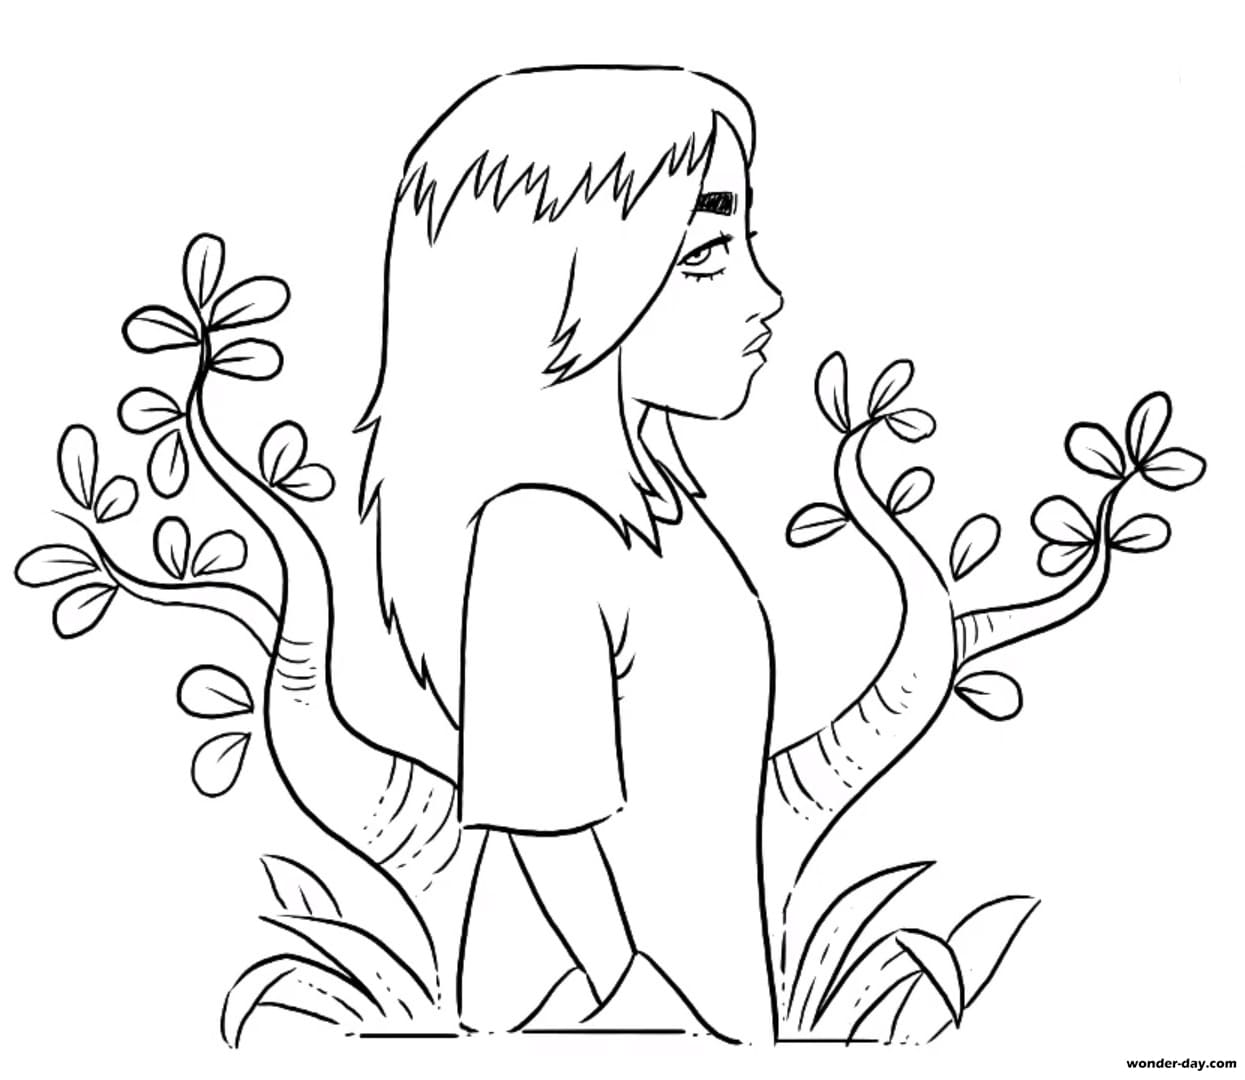 Download Coloring Pages Billie Eilish. Download or print for free